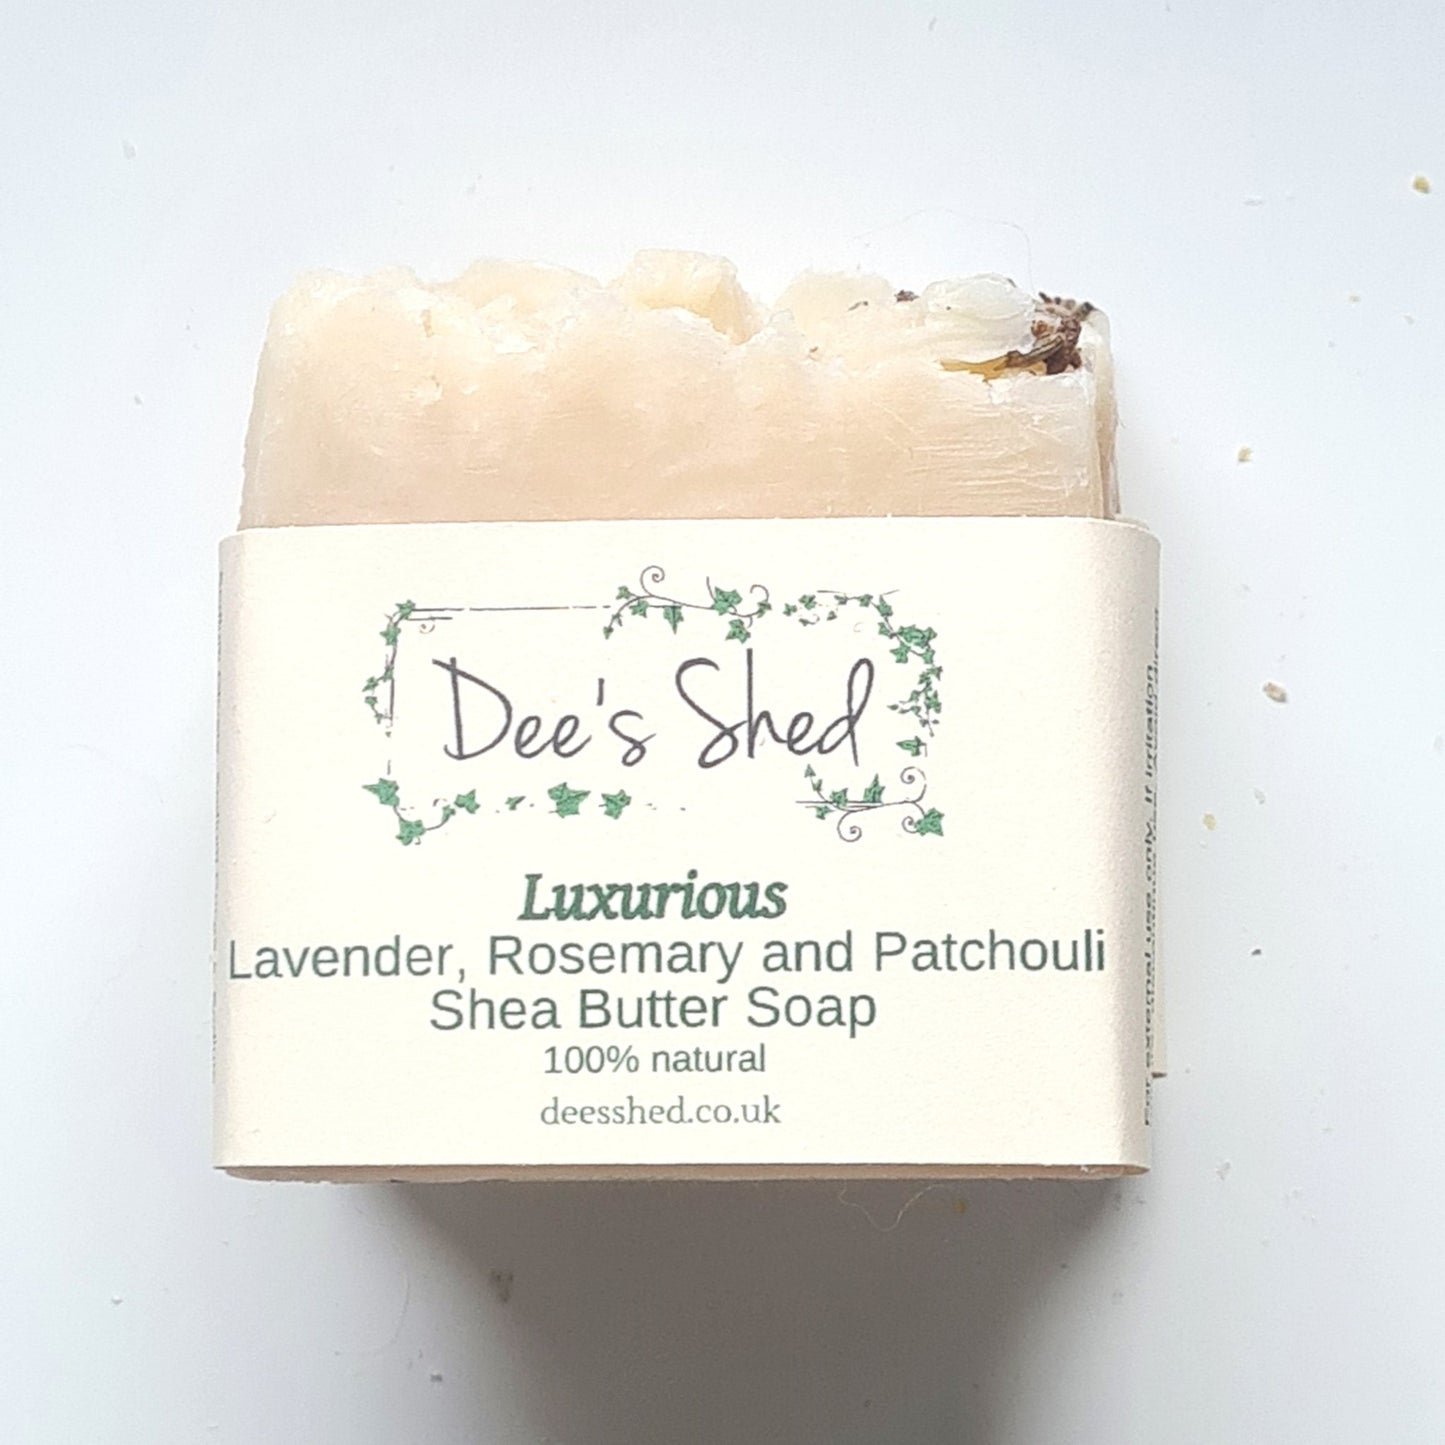 Soap - Luxury Lavender, Rosemary and Patchouli Shea Butter Soap - Dees Shed